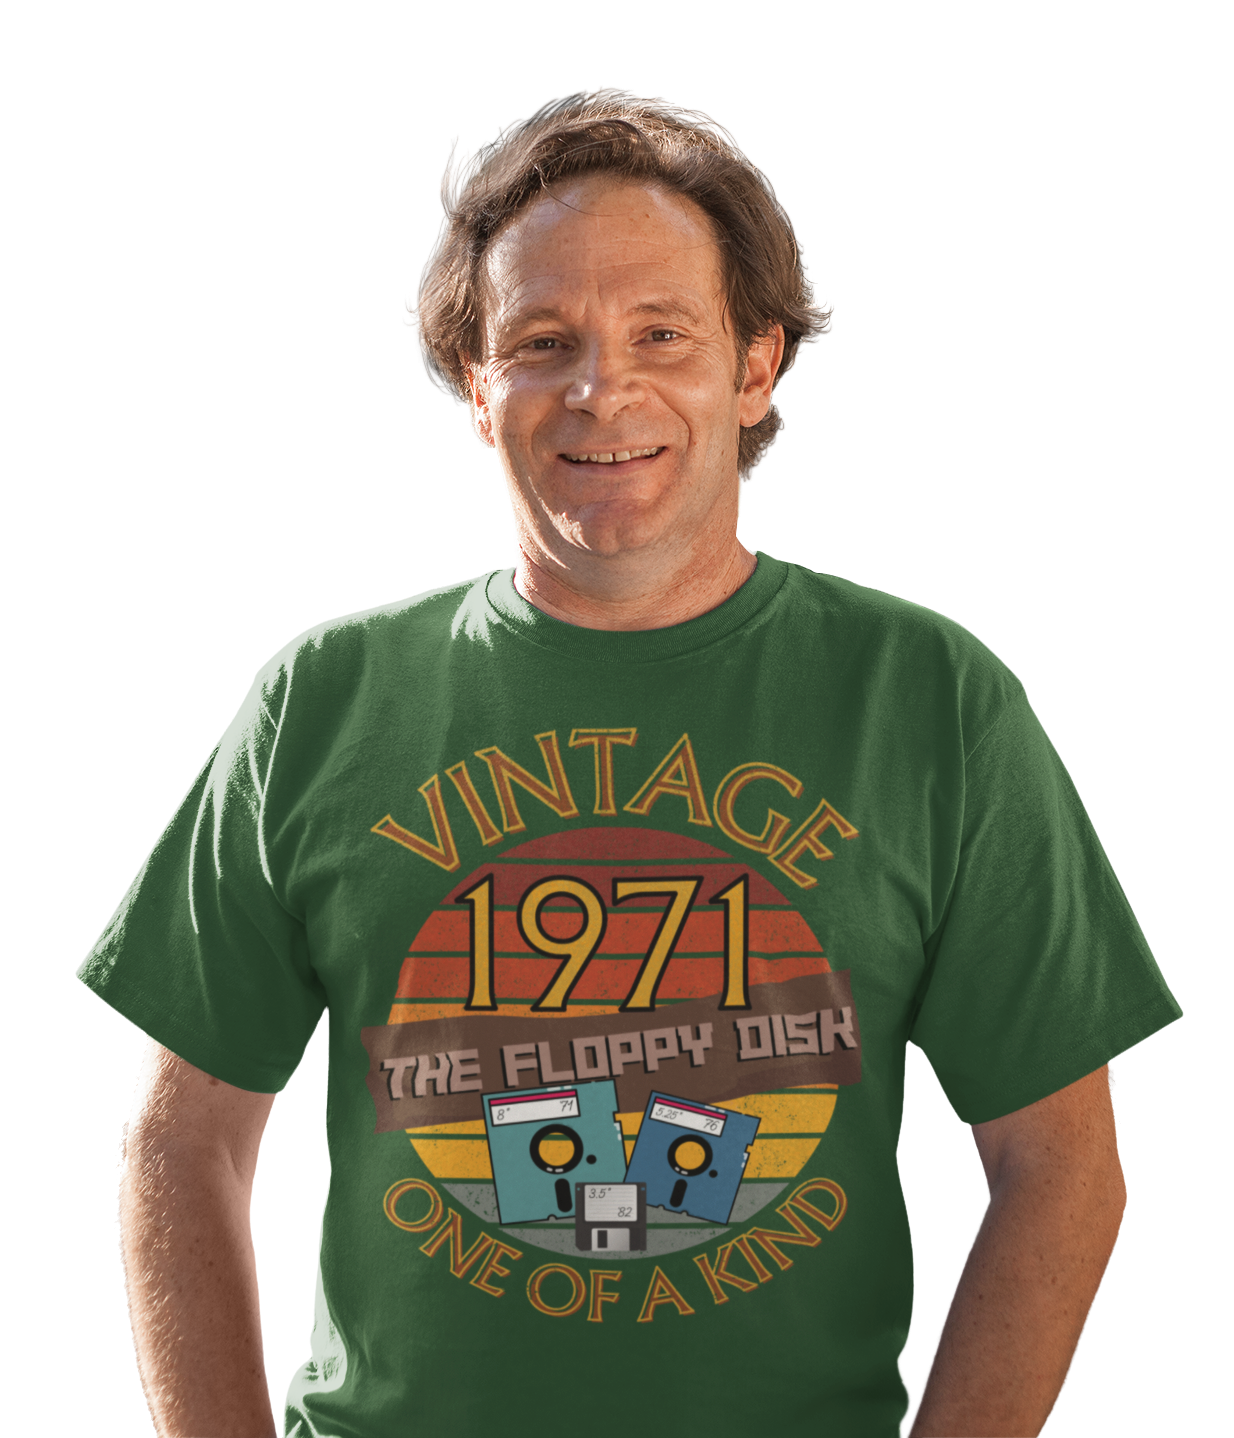 A man wearing a green T-Shirt with the words vintage,1971,the floppy disk ,one of a kind, 3 different types of floppy disk,8,5.25,3.5 inch